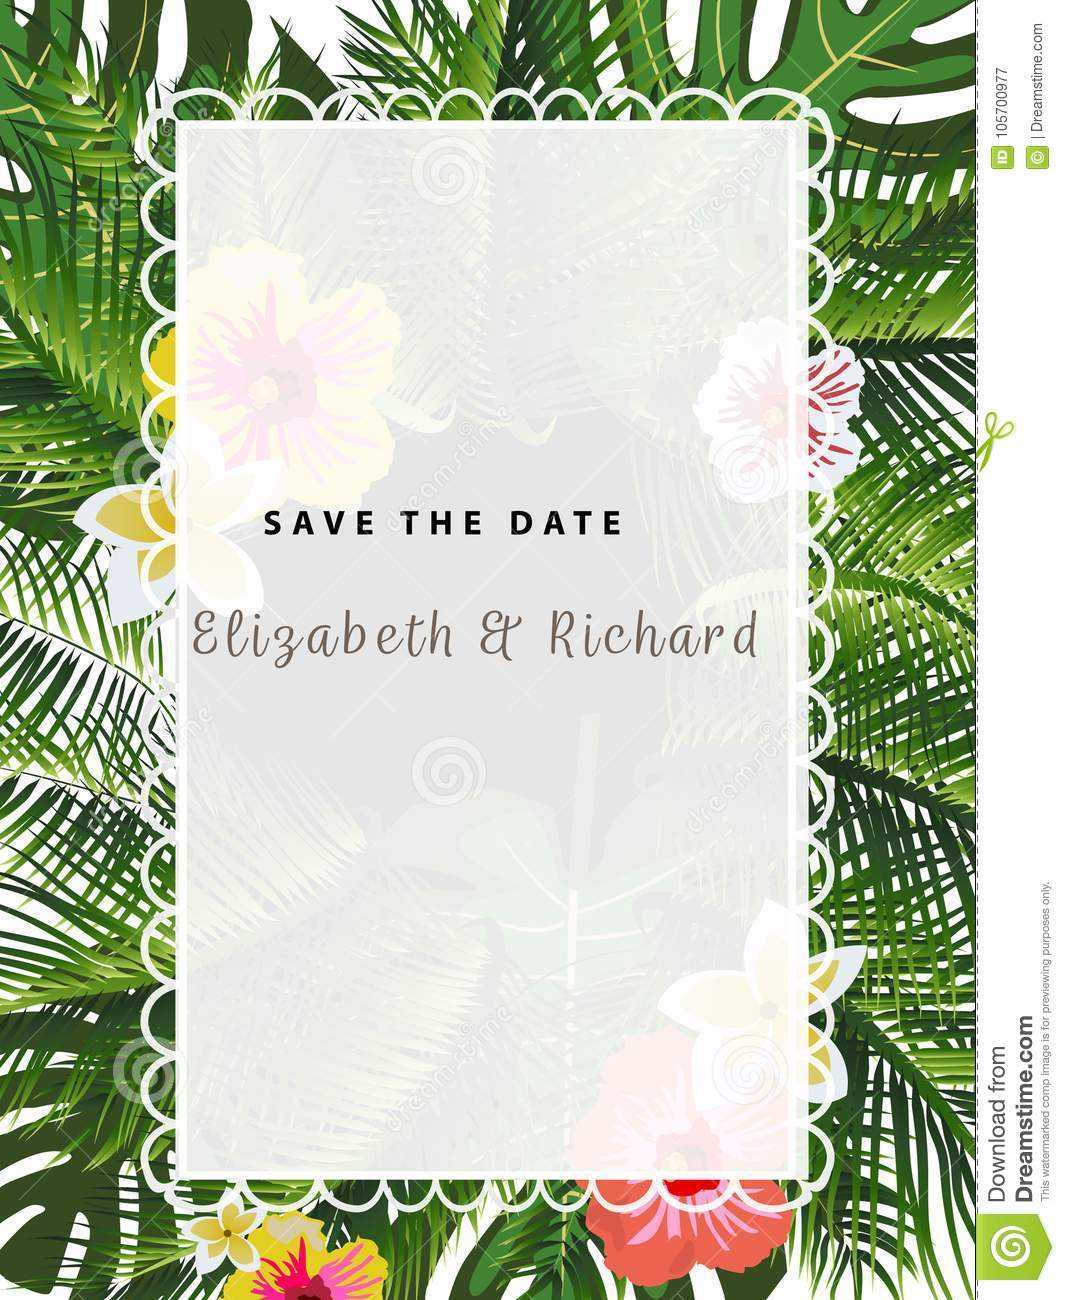 Abstract Background With Many Falling Tiny Confetti Pieces Pertaining To Event Invitation Card Template